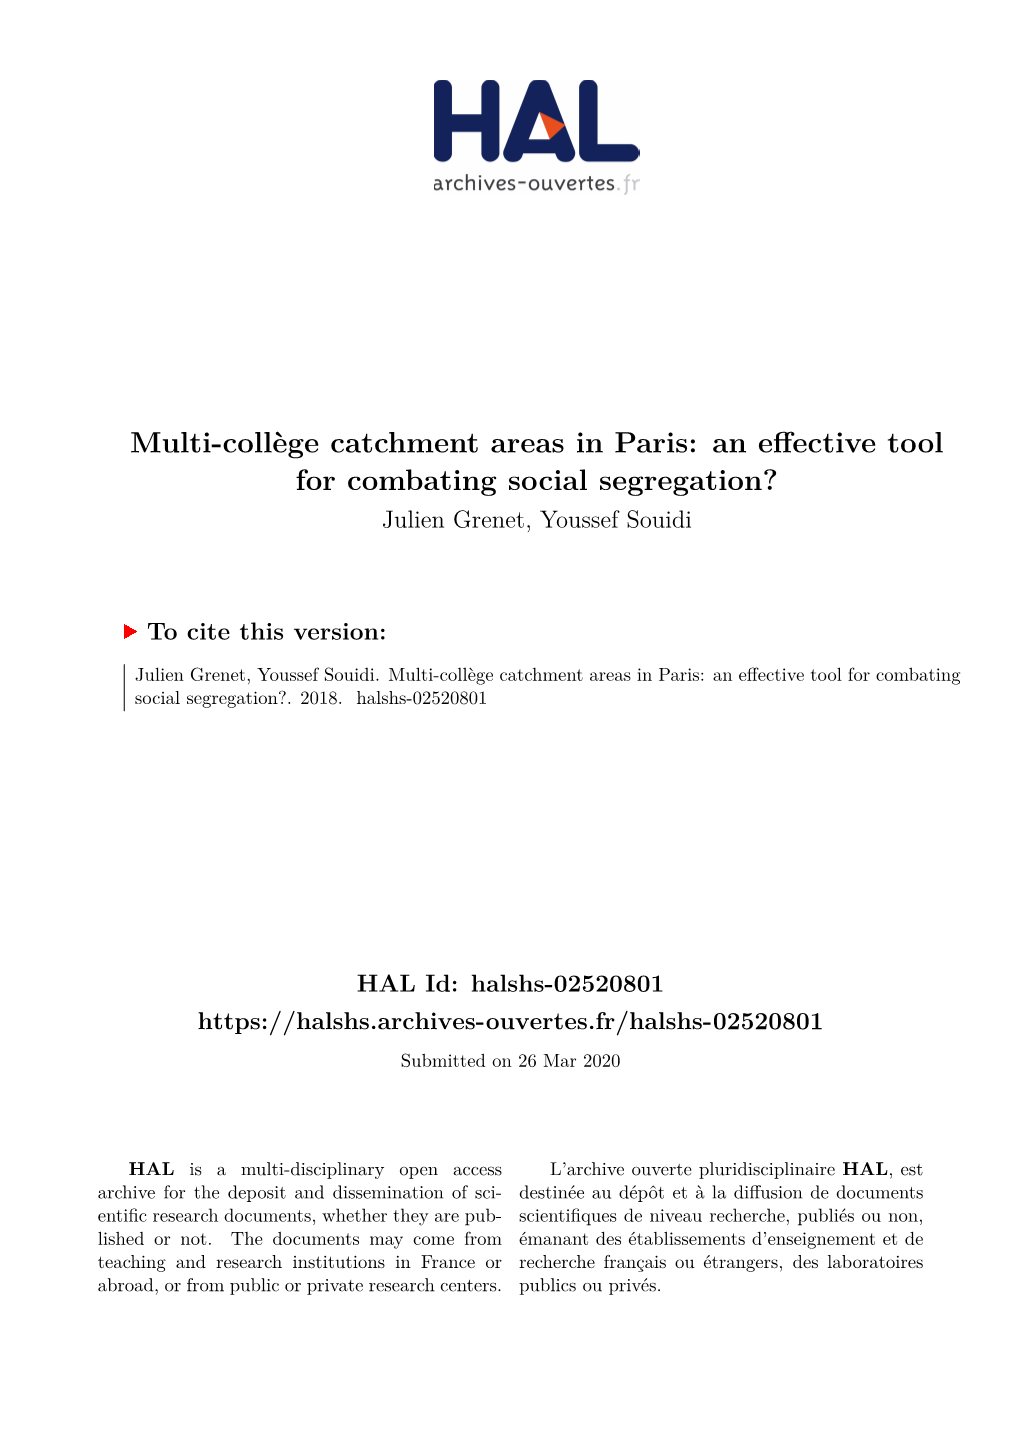 Multi-Collège Catchment Areas in Paris: an Effective Tool for Combating Social Segregation? Julien Grenet, Youssef Souidi